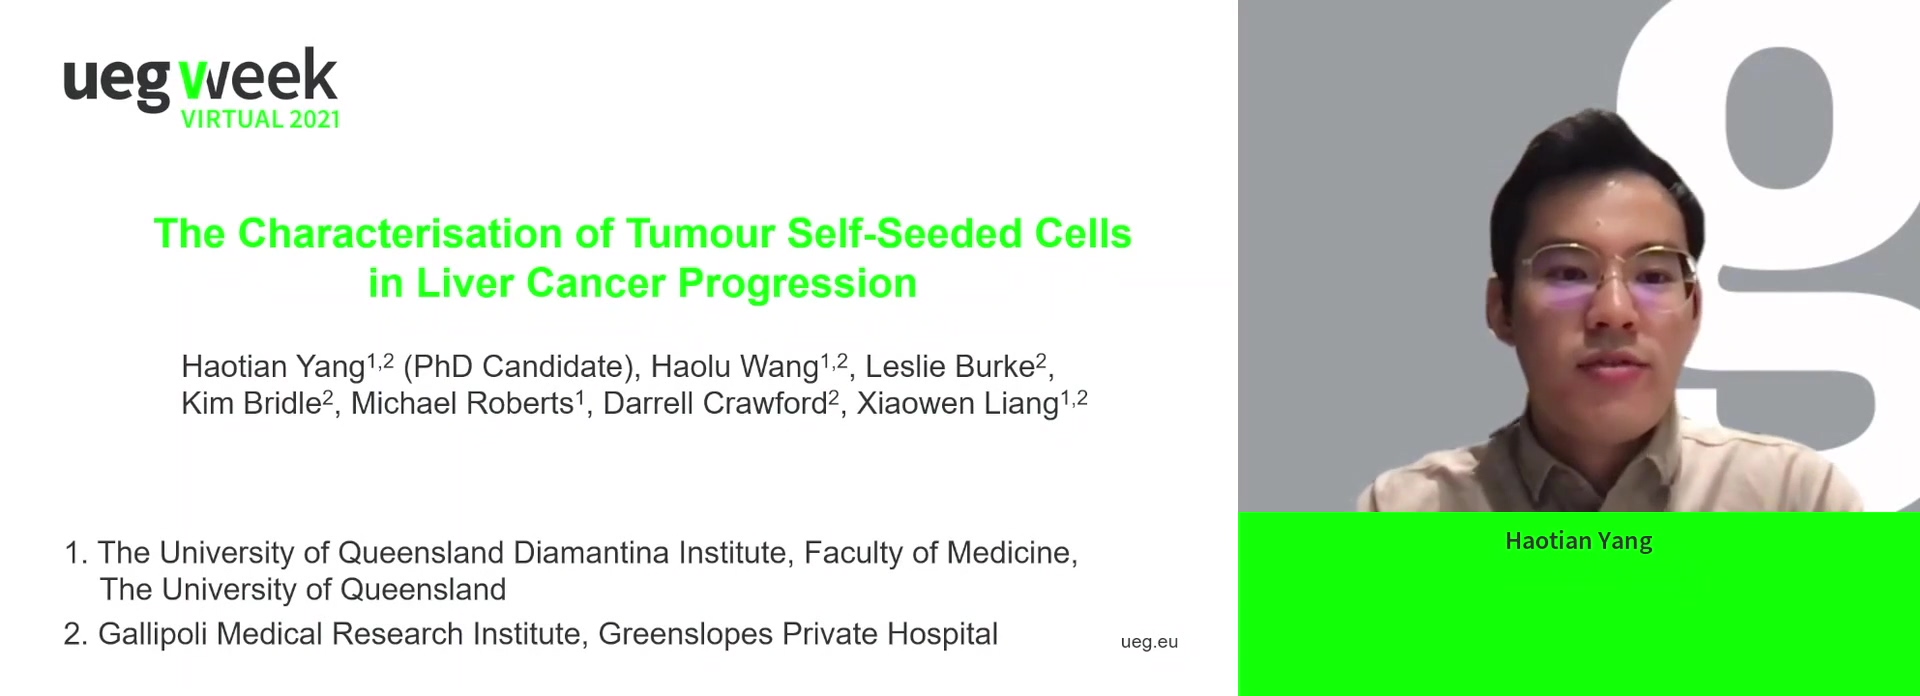 THE ROLES OF TUMOUR SELF-SEEDED CELLS IN LIVER CANCER PROGRESSION